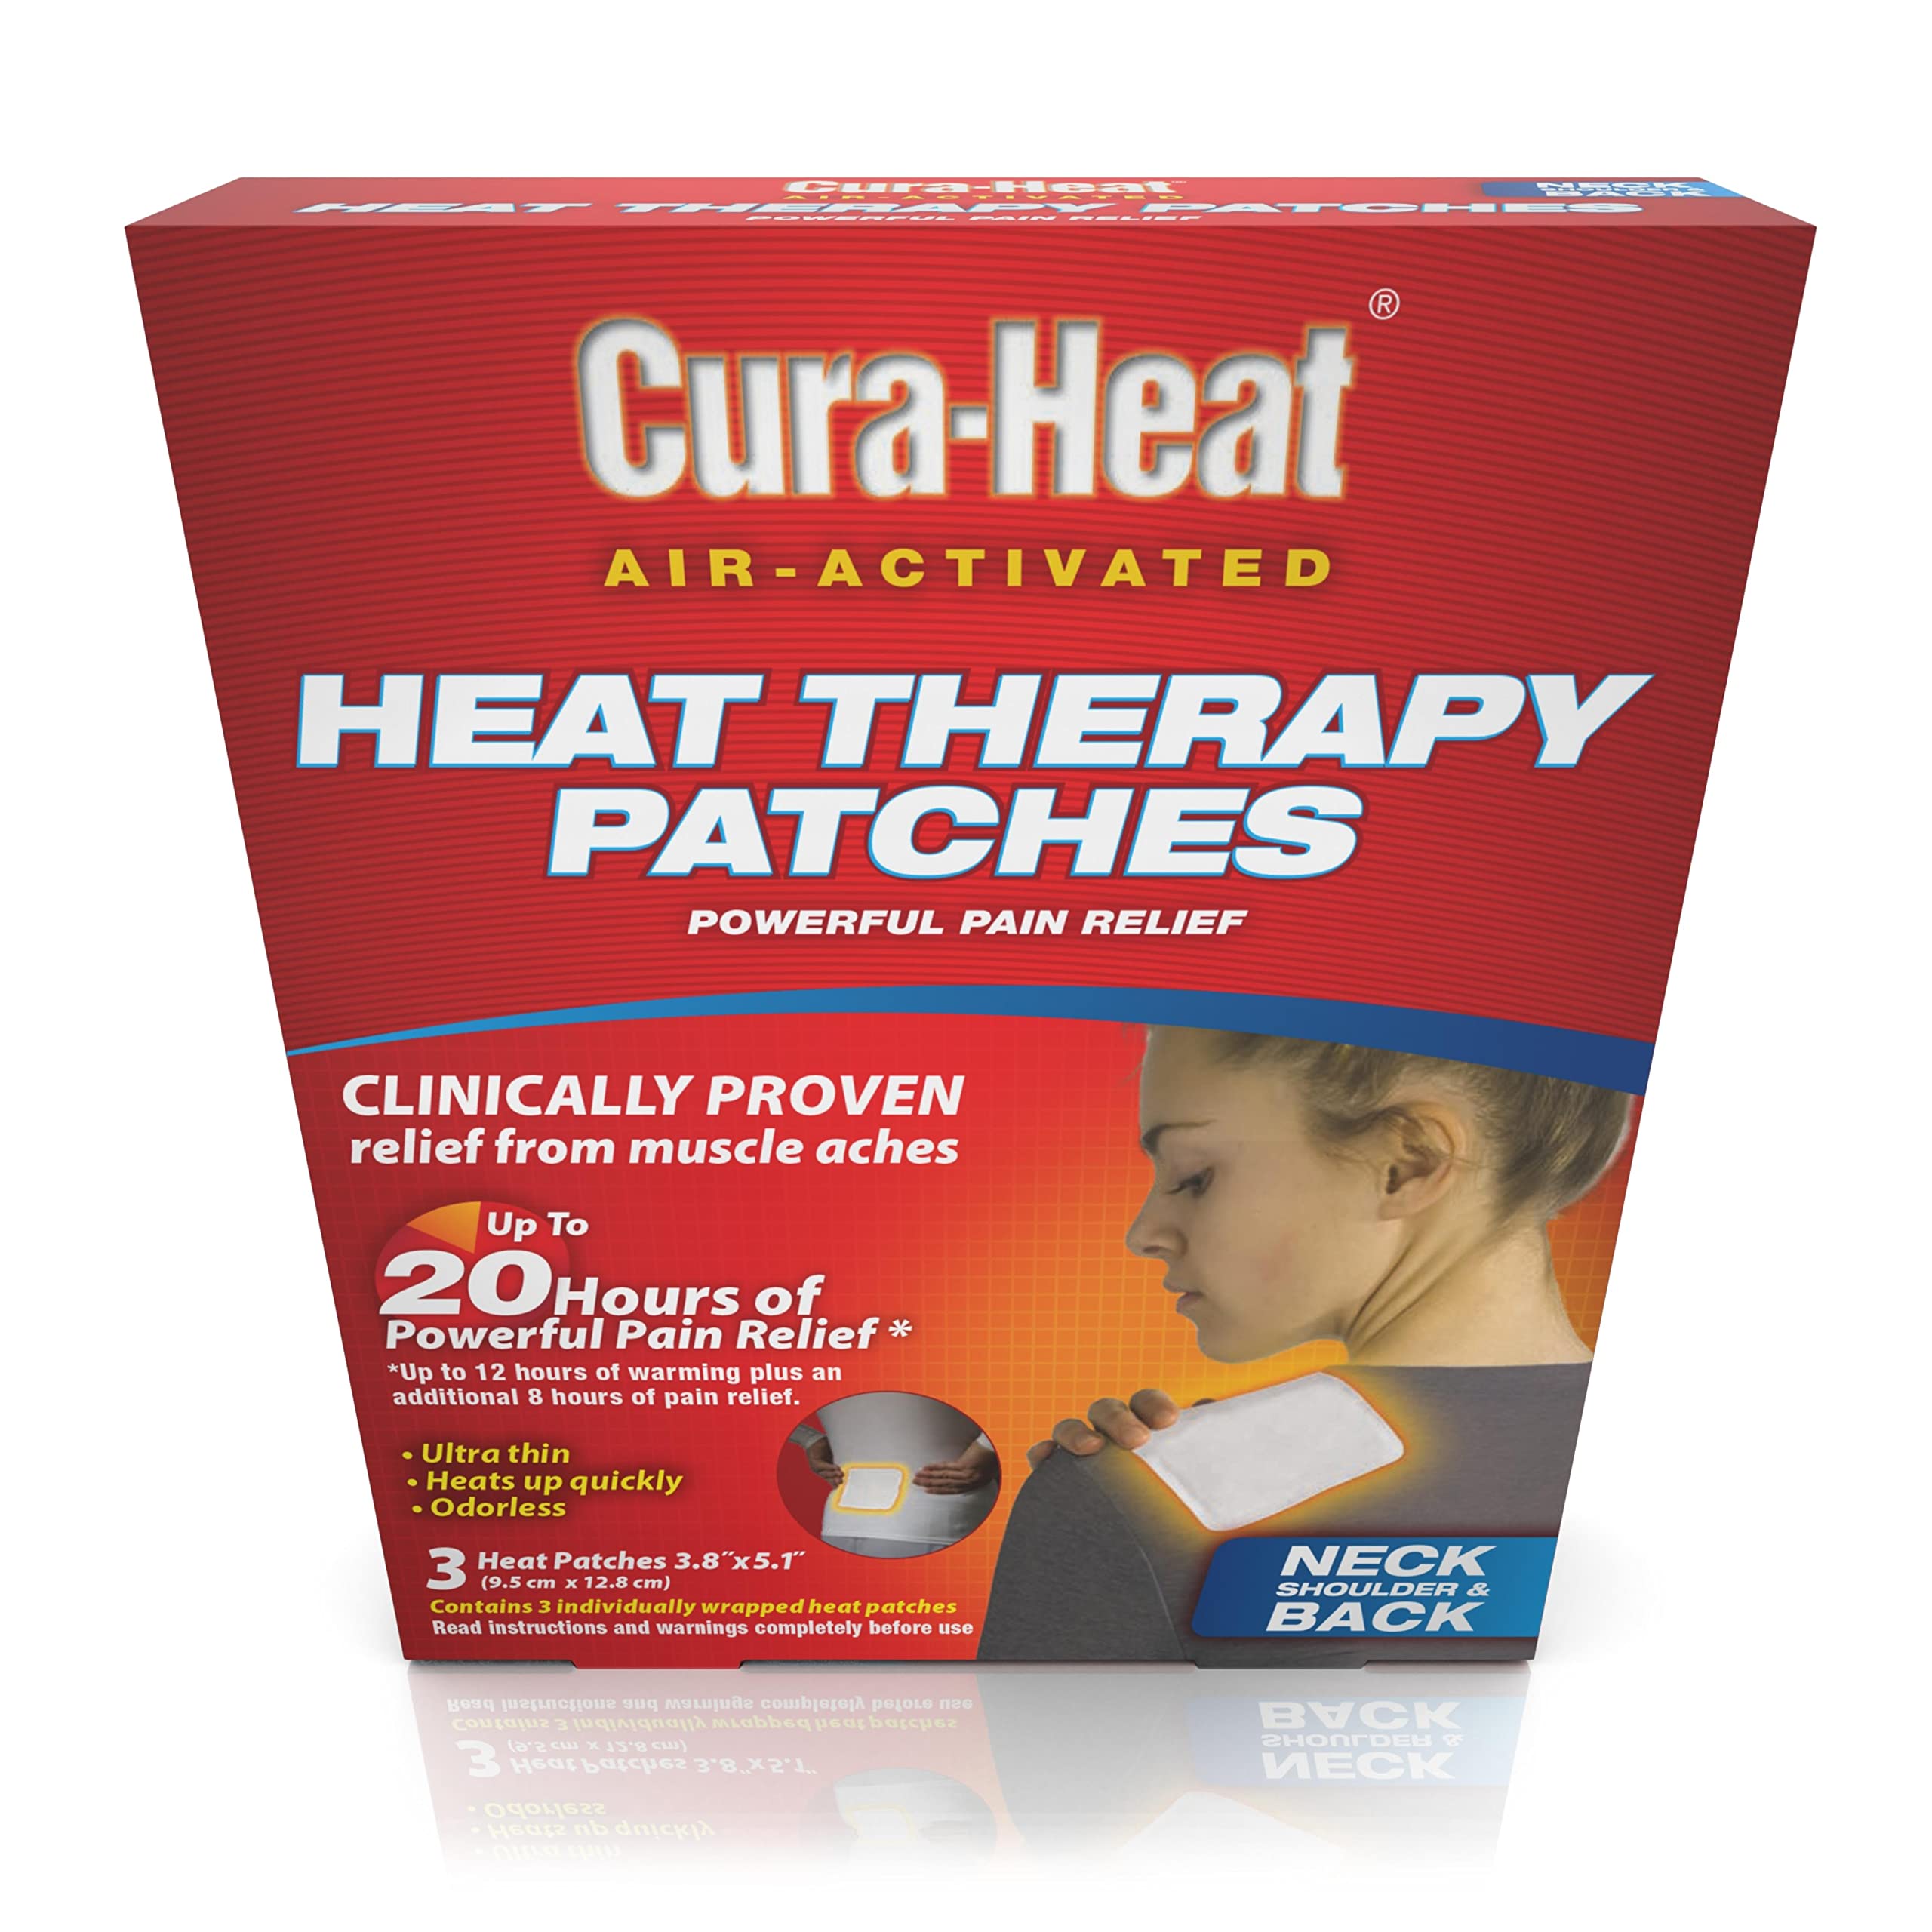 Cura Heat Multi-Purpose Therapeutic Heat Wrap (3 Count), Soothes, Relaxes, Relieves, and Unlocks Tight Muscles, White, (01100D)